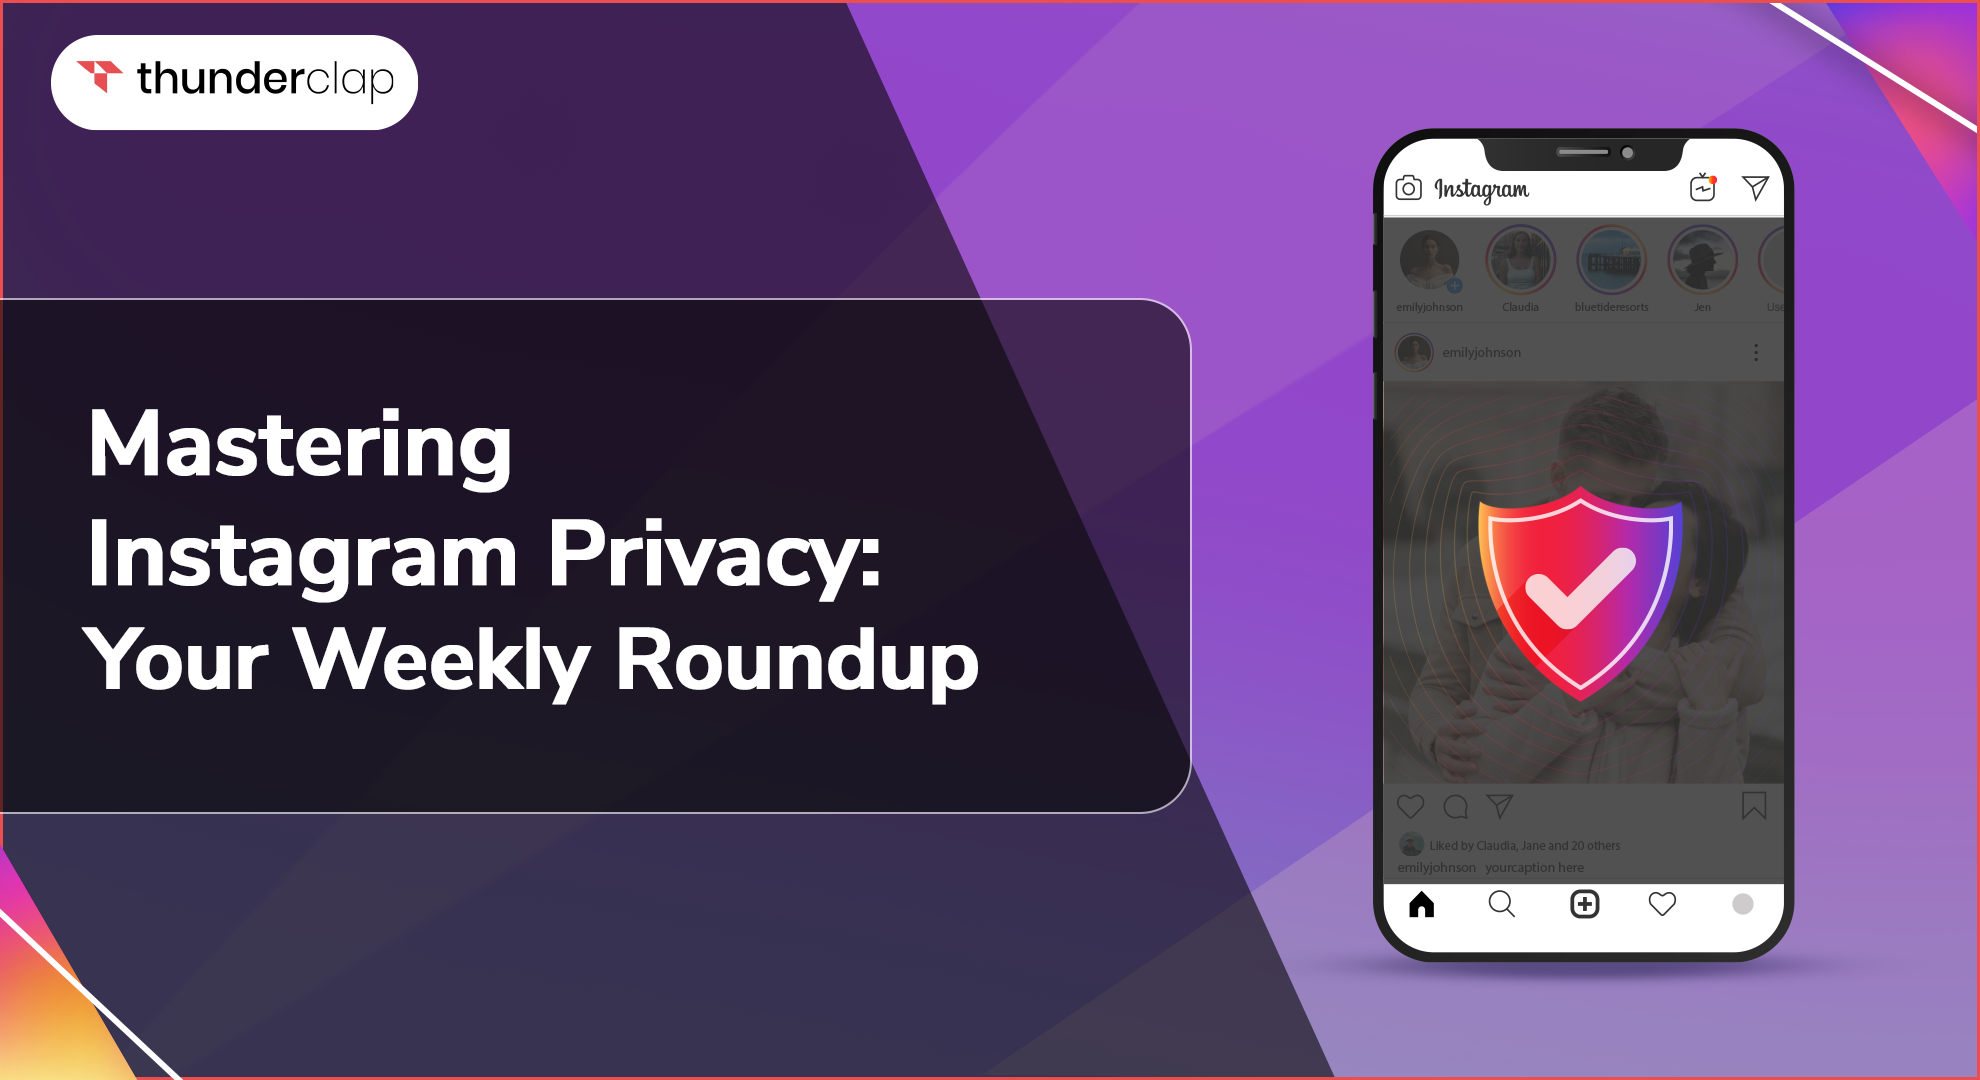 Mastering Instagram Privacy Weekly Roundup